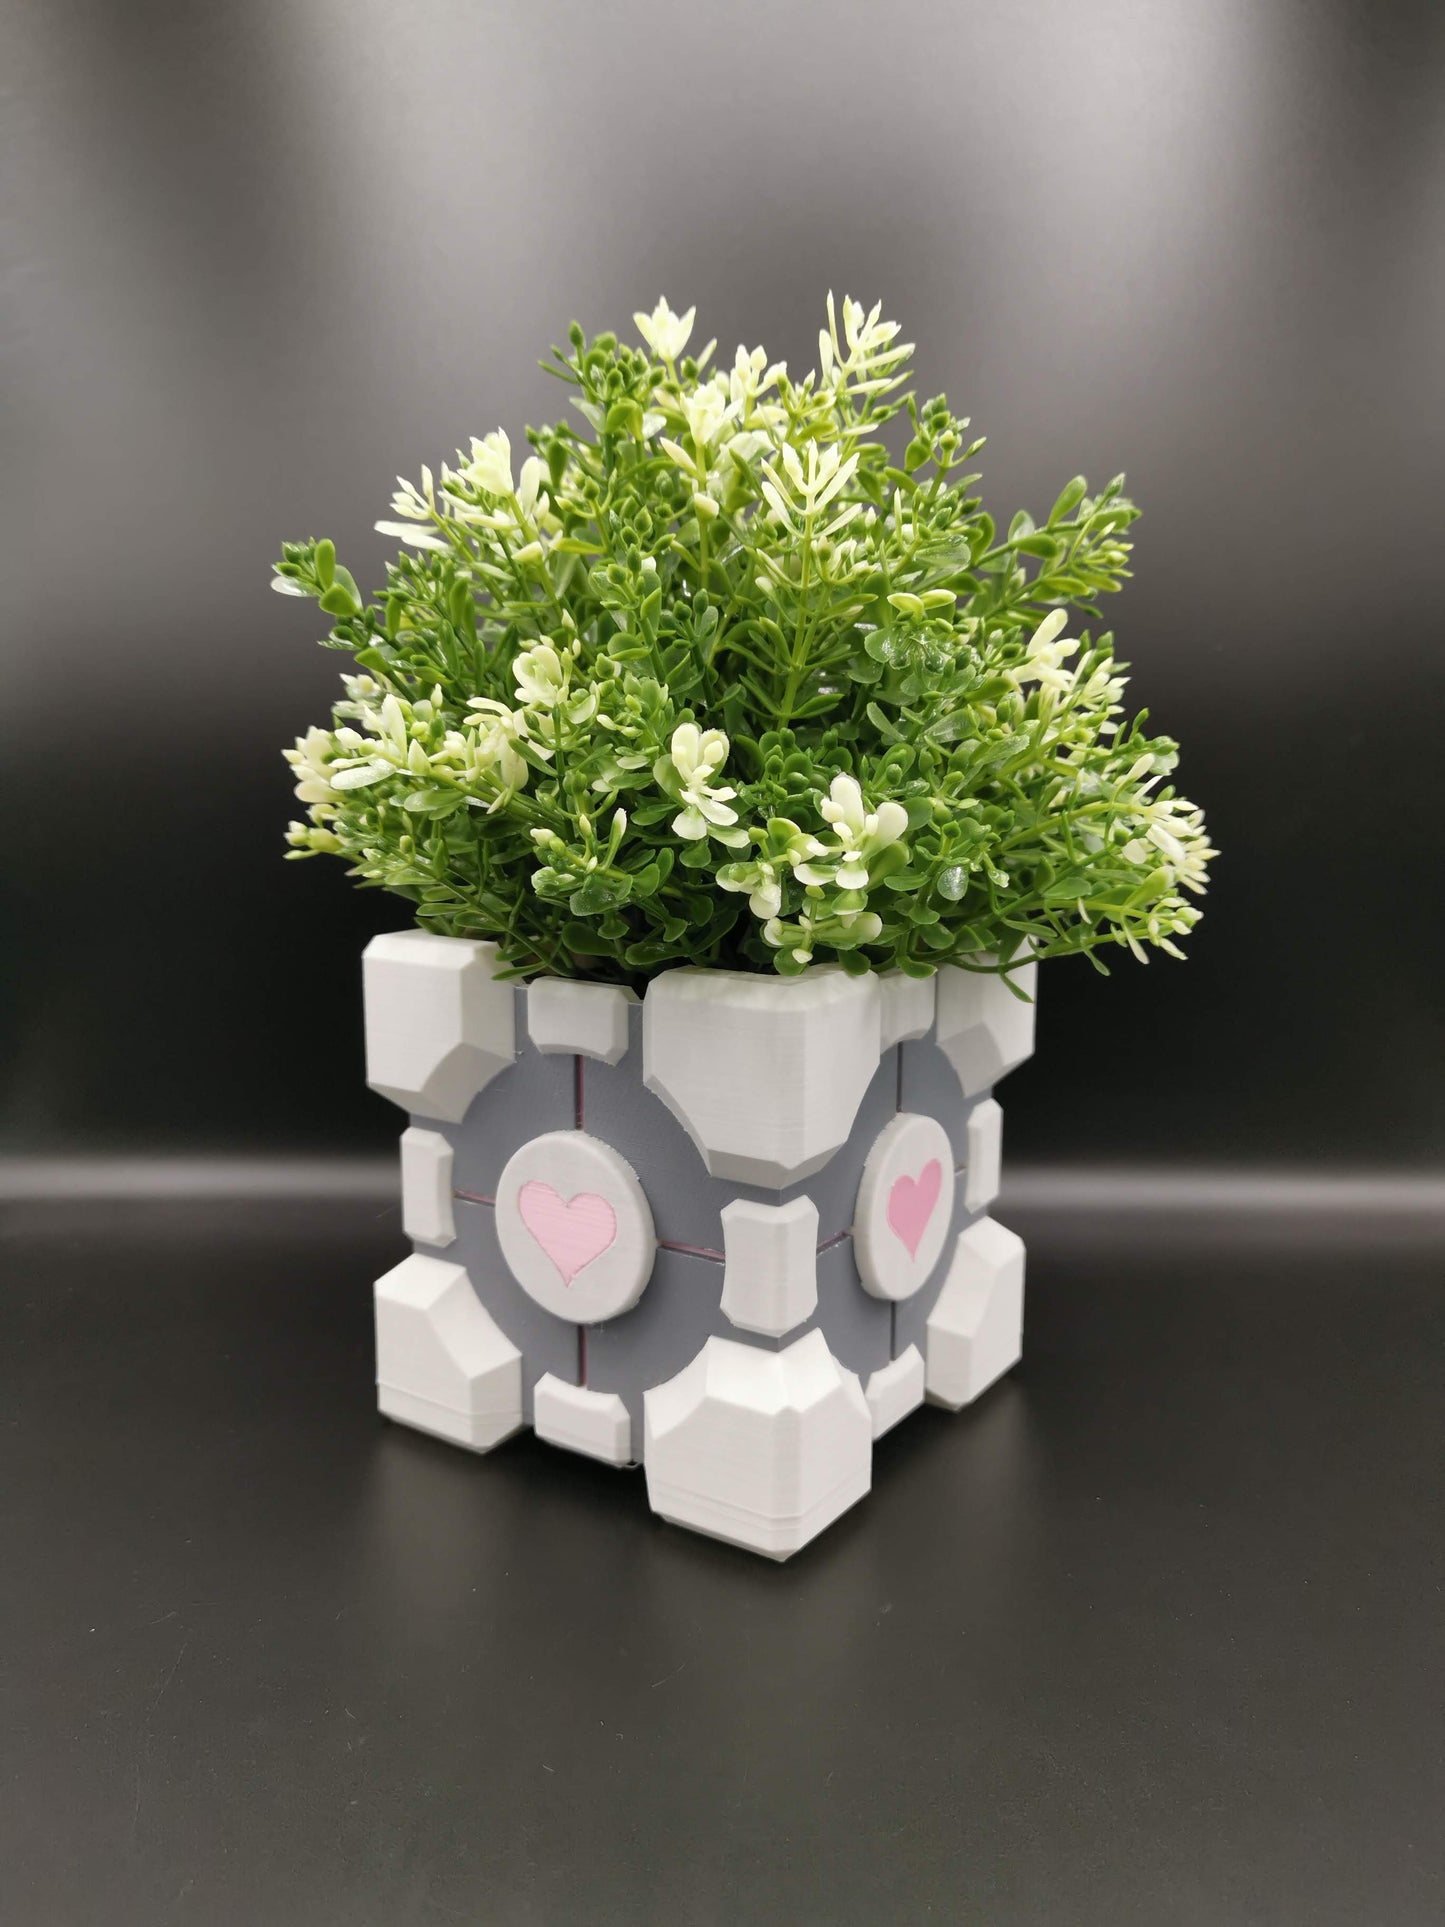 Companion Cube Portal planter with plant from front angle close up